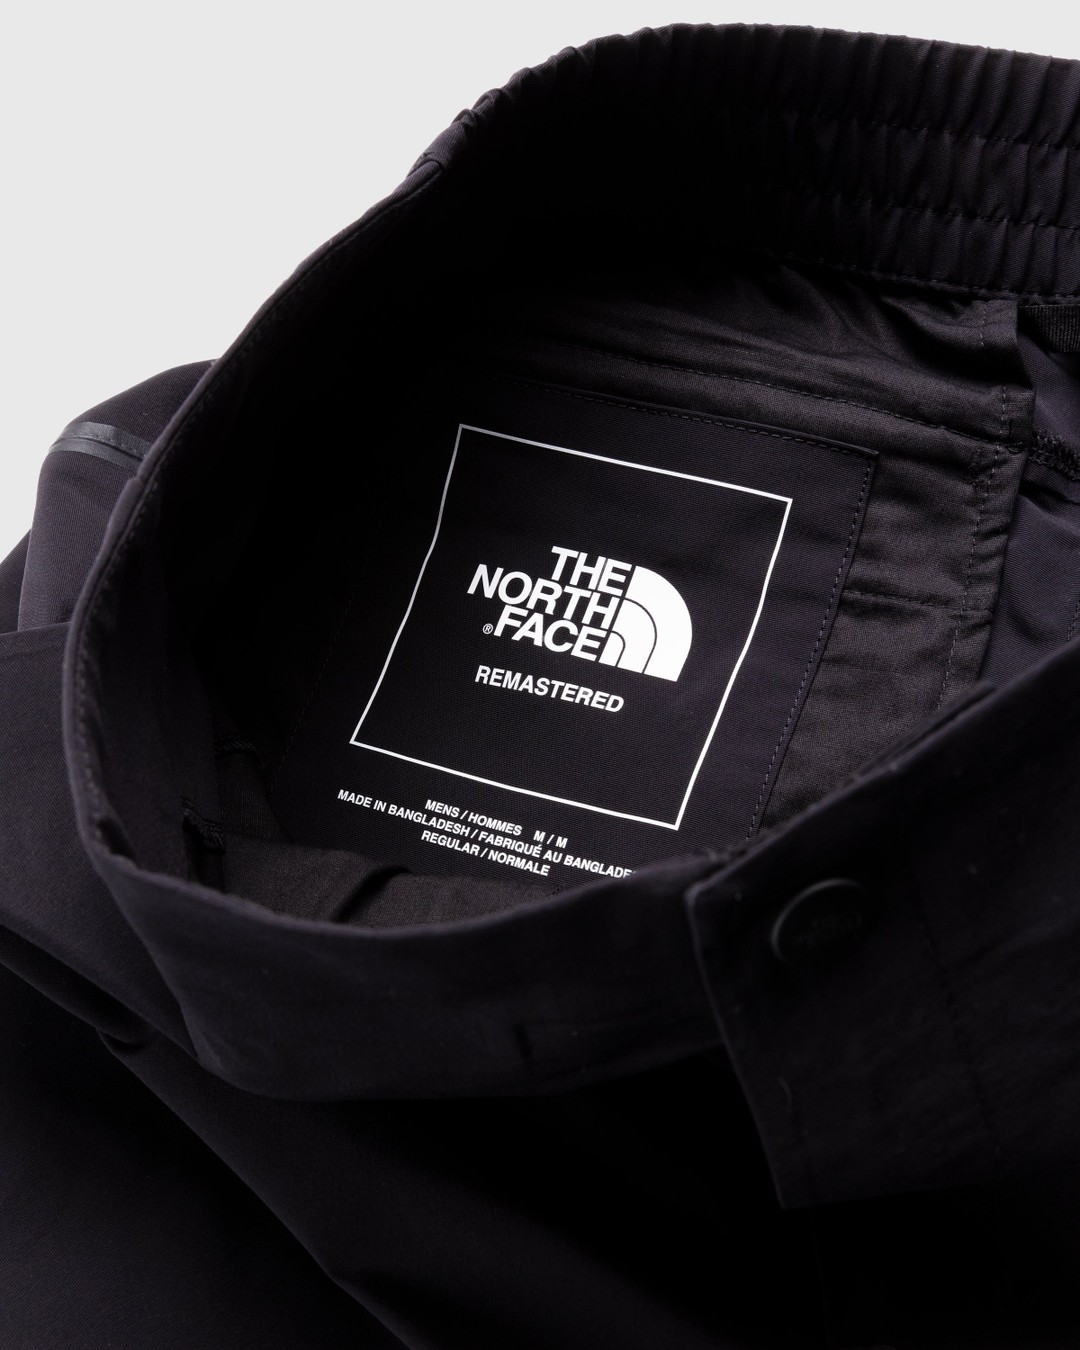 The North Face – RMST Mountain Pant Black - Track Pants - Black - Image 4